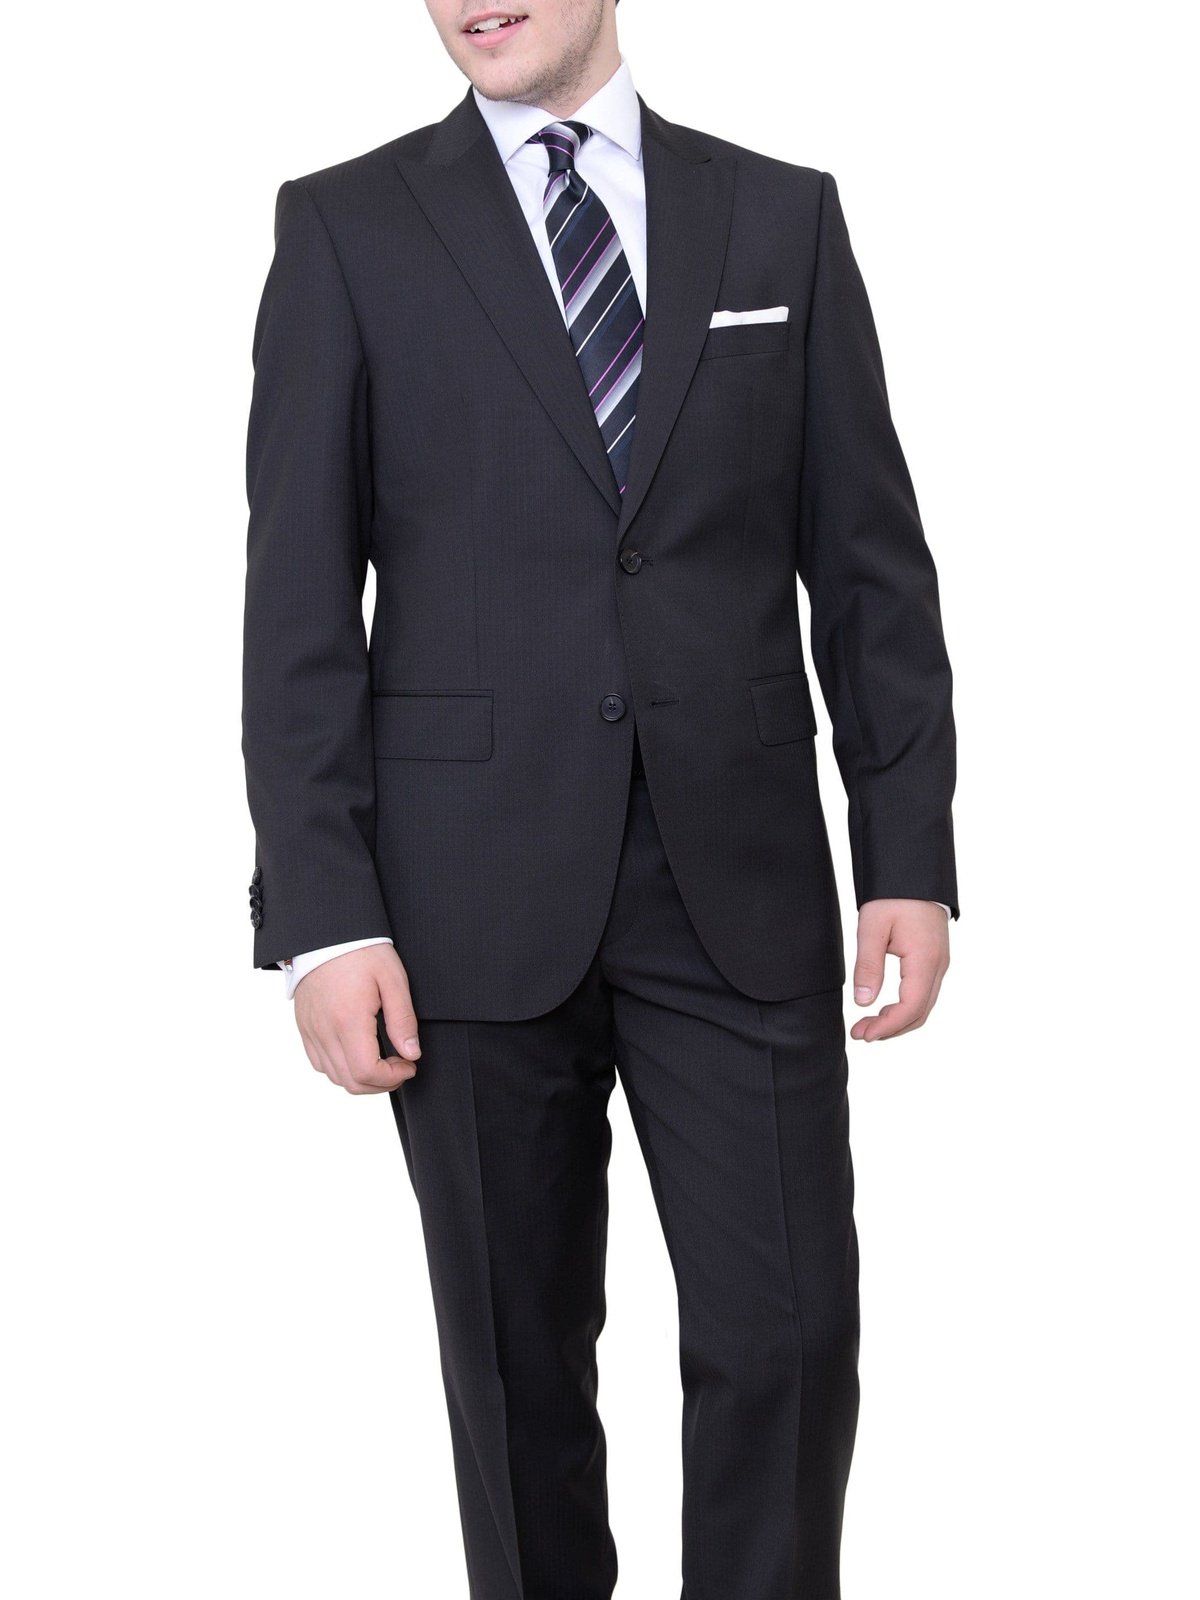 HUGO BOSS TWO PIECE SUITS 38S Hugo Boss Thefordham/central Black Tonal Striped Wool Suit With Peak Lapels